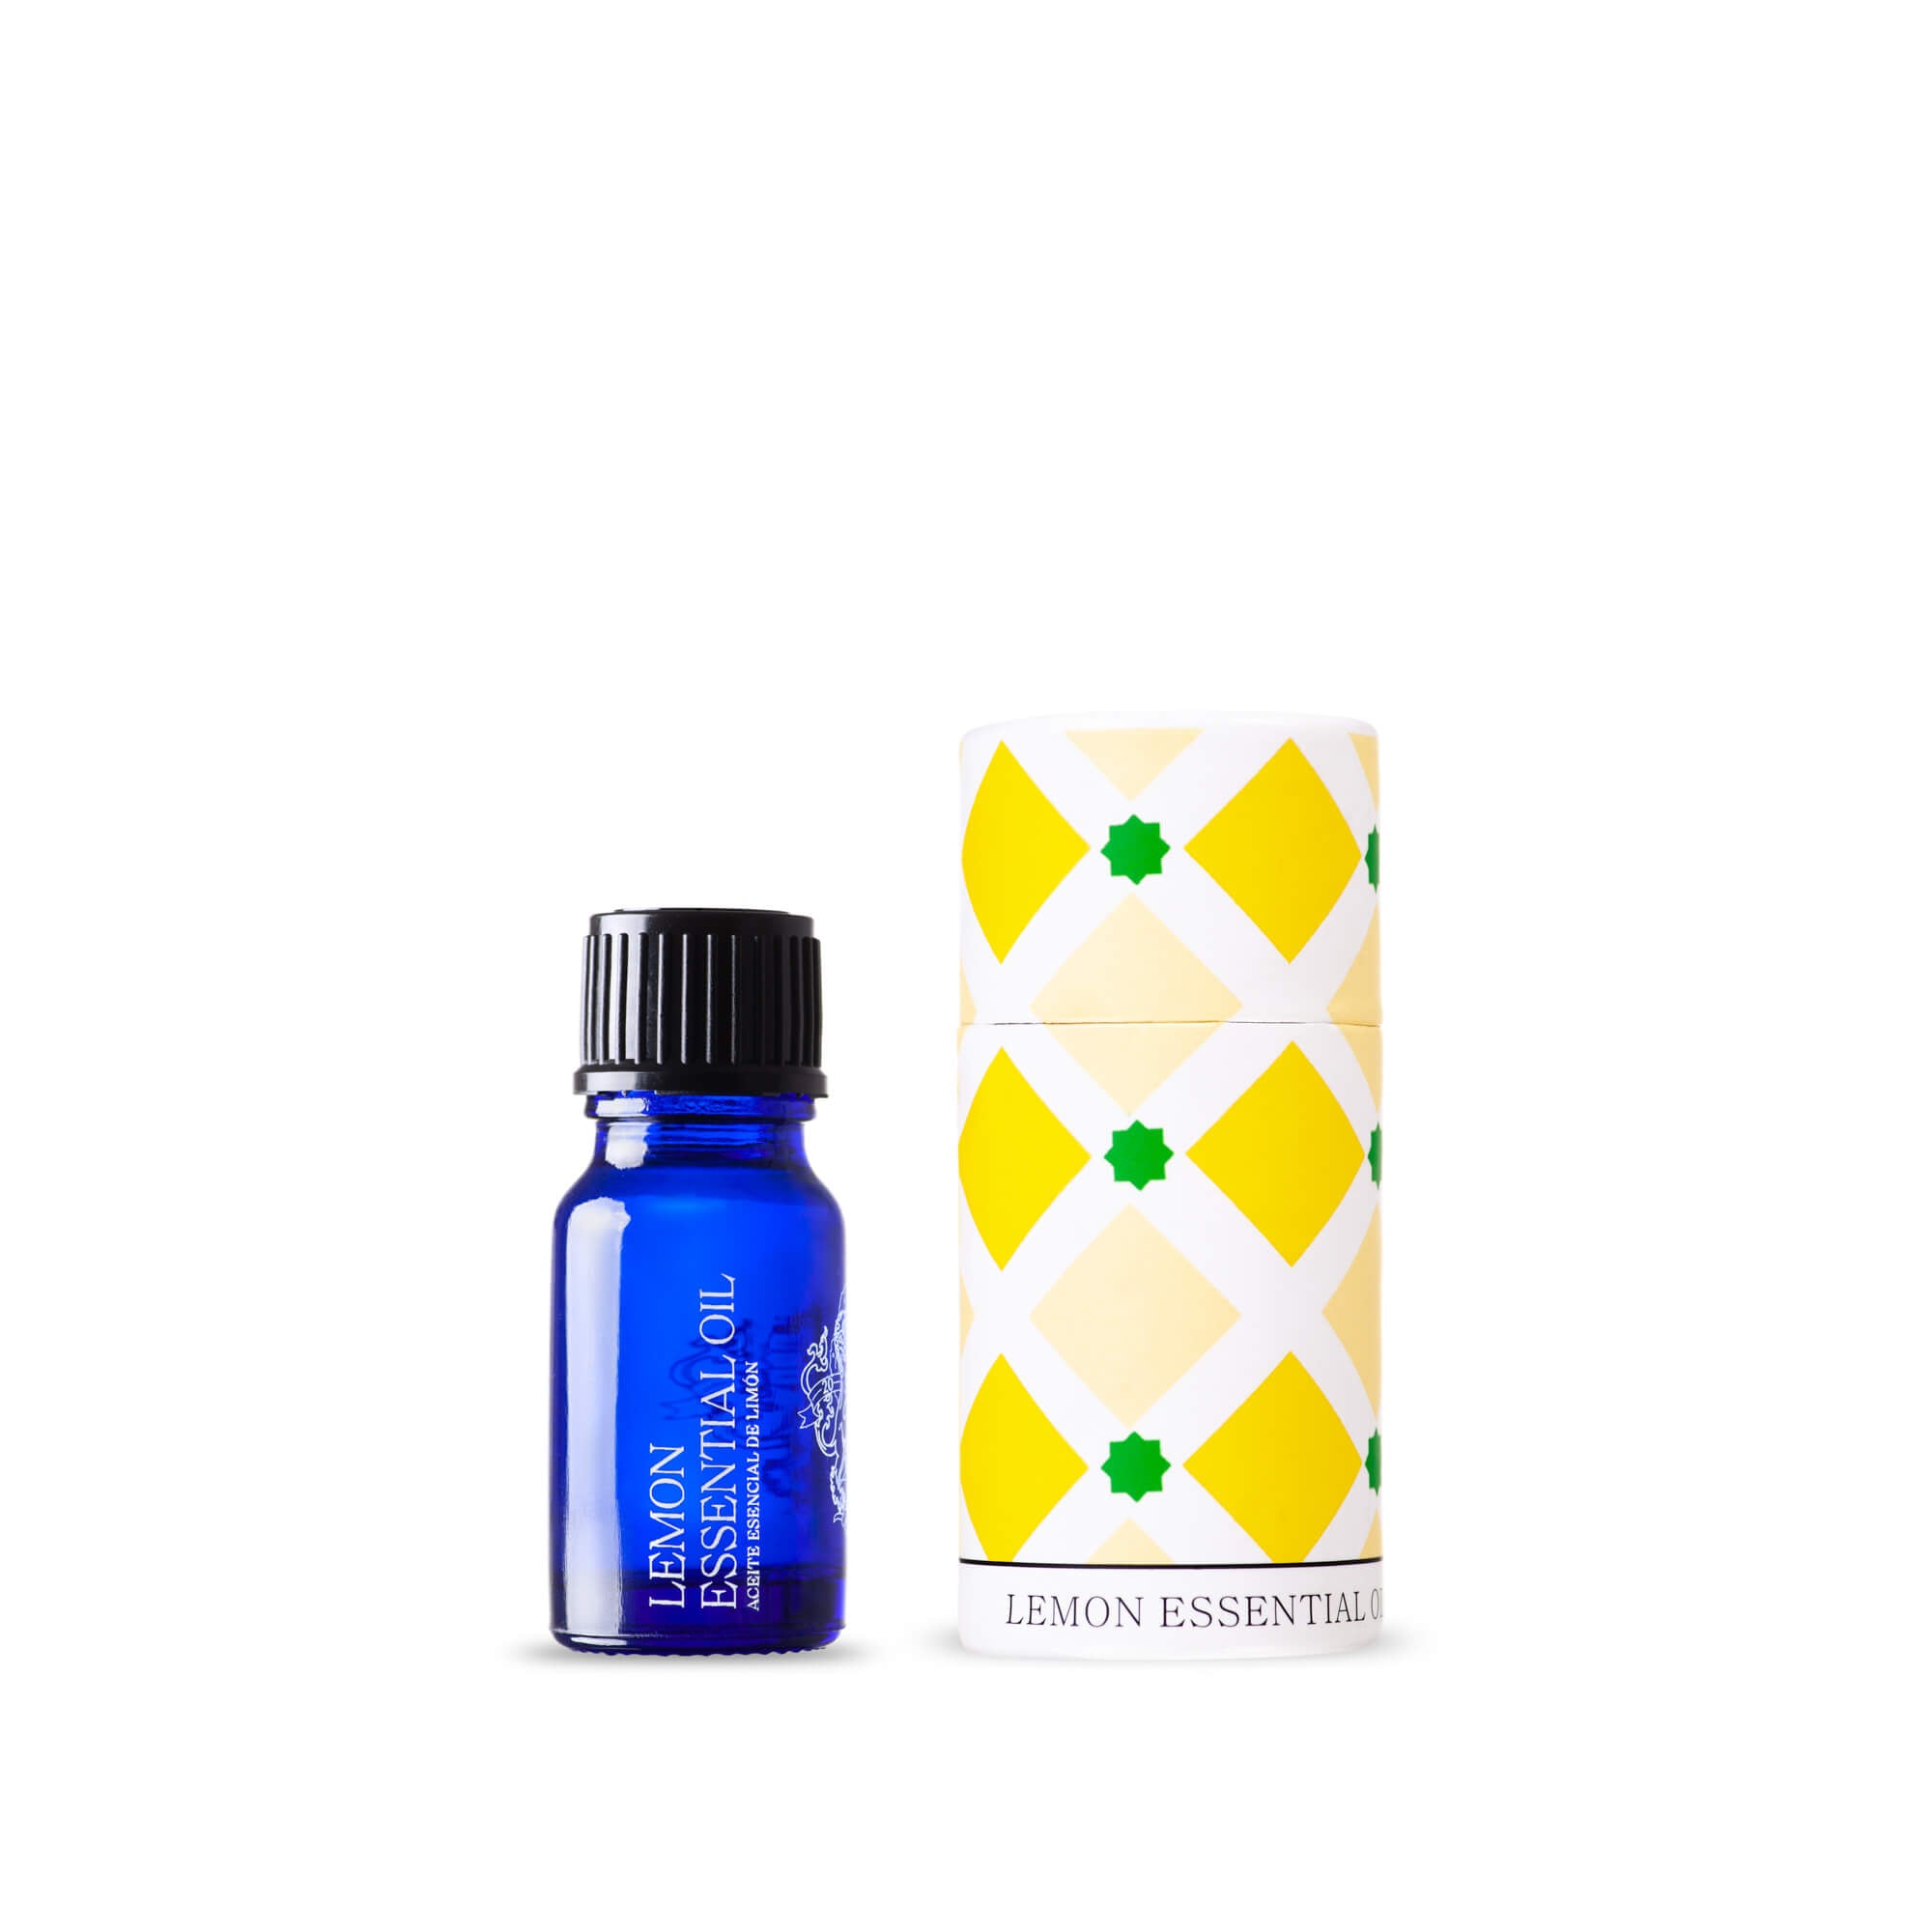 ANDALUZ Skincare Lemon Essential Oil - made with 100% eco spanish lemons. Ecocert and USDA certified organic. it comes in a bright blue 10 milliliter glass bottle and a black lid. it also has its own colorful round box with yellow designs that are inspired from the tiles at the alhambra palace in granada spain. 